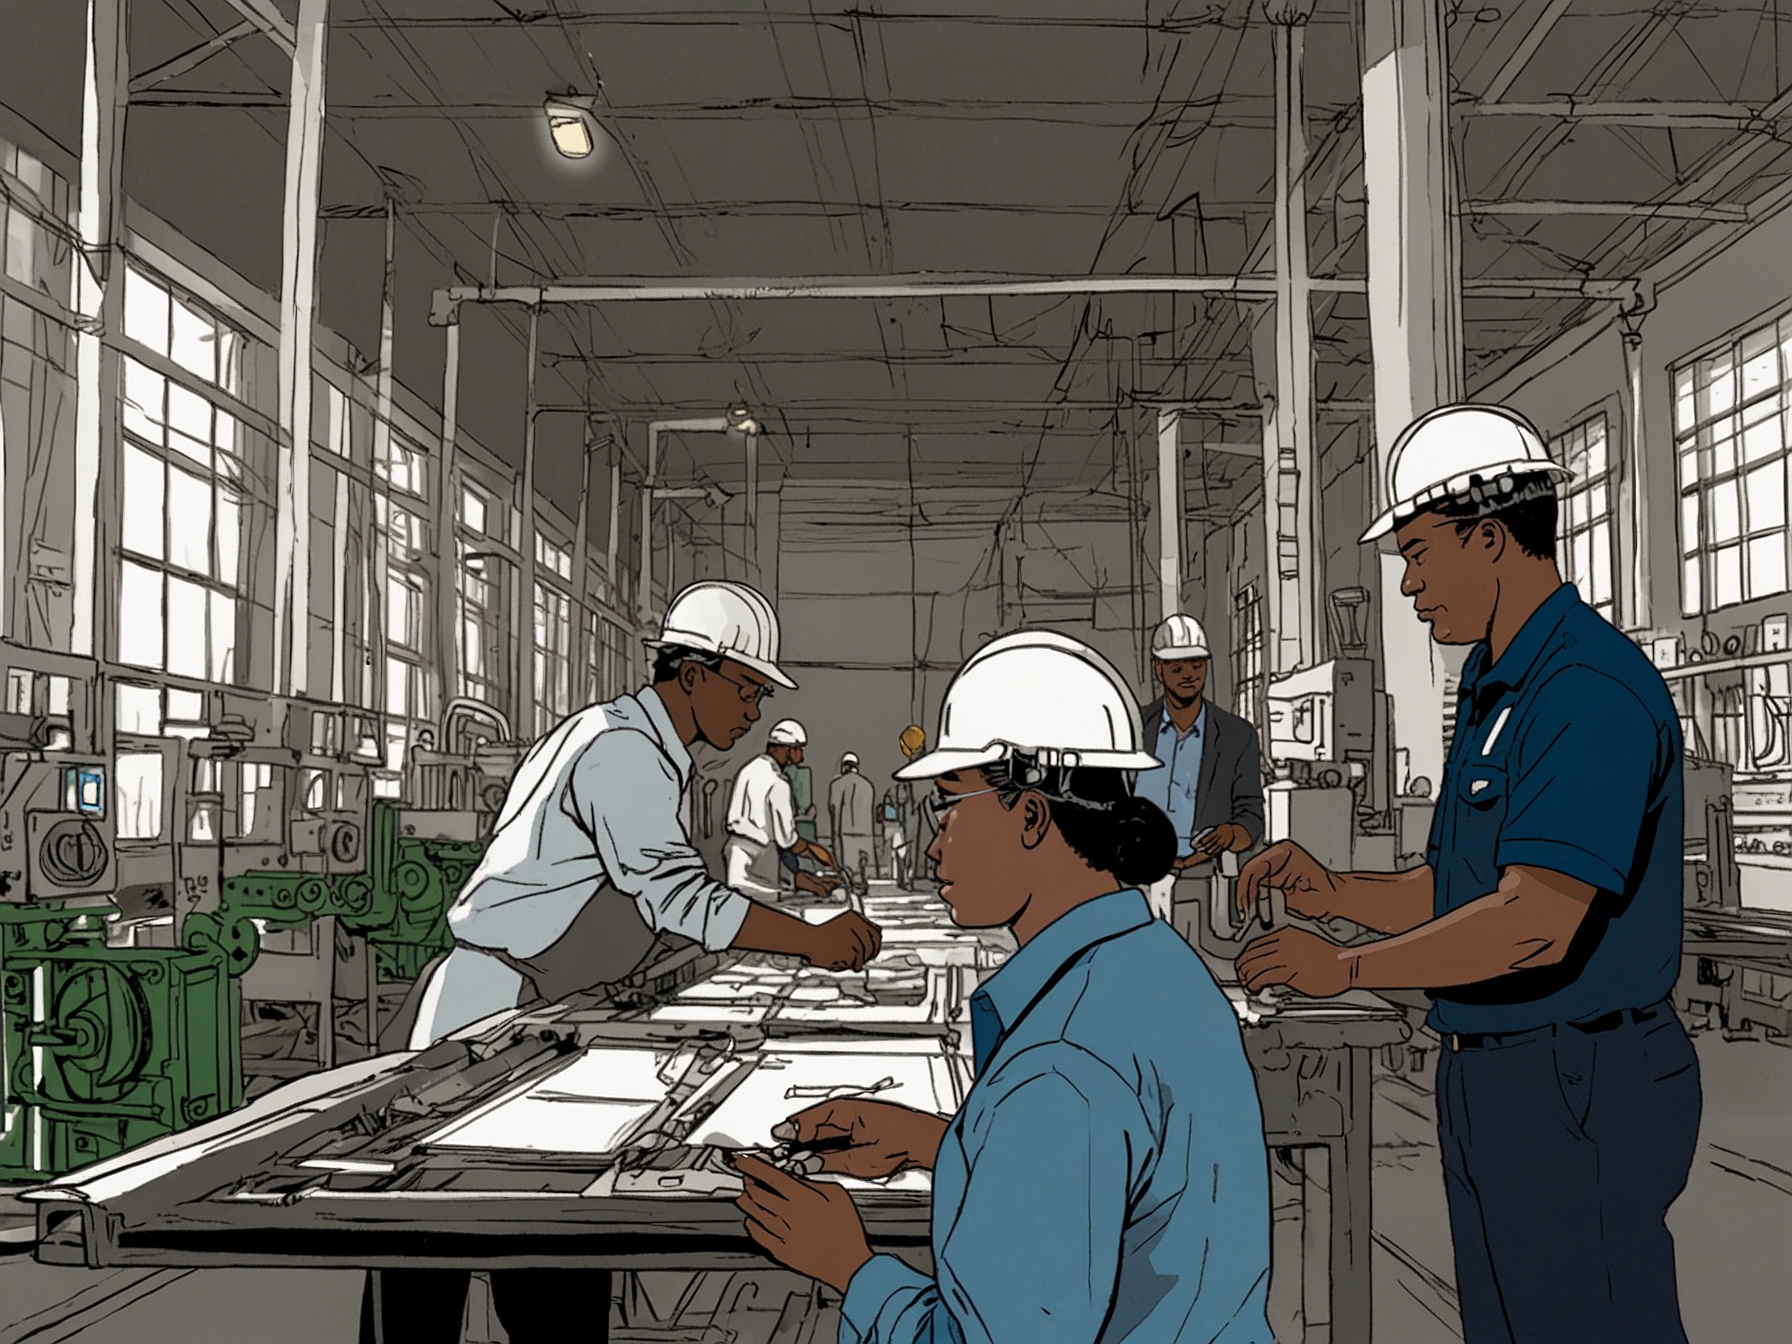 An image depicting workers at a manufacturing facility engaged in training programs, illustrating ongoing business investments in workforce development to promote sector resilience and growth.